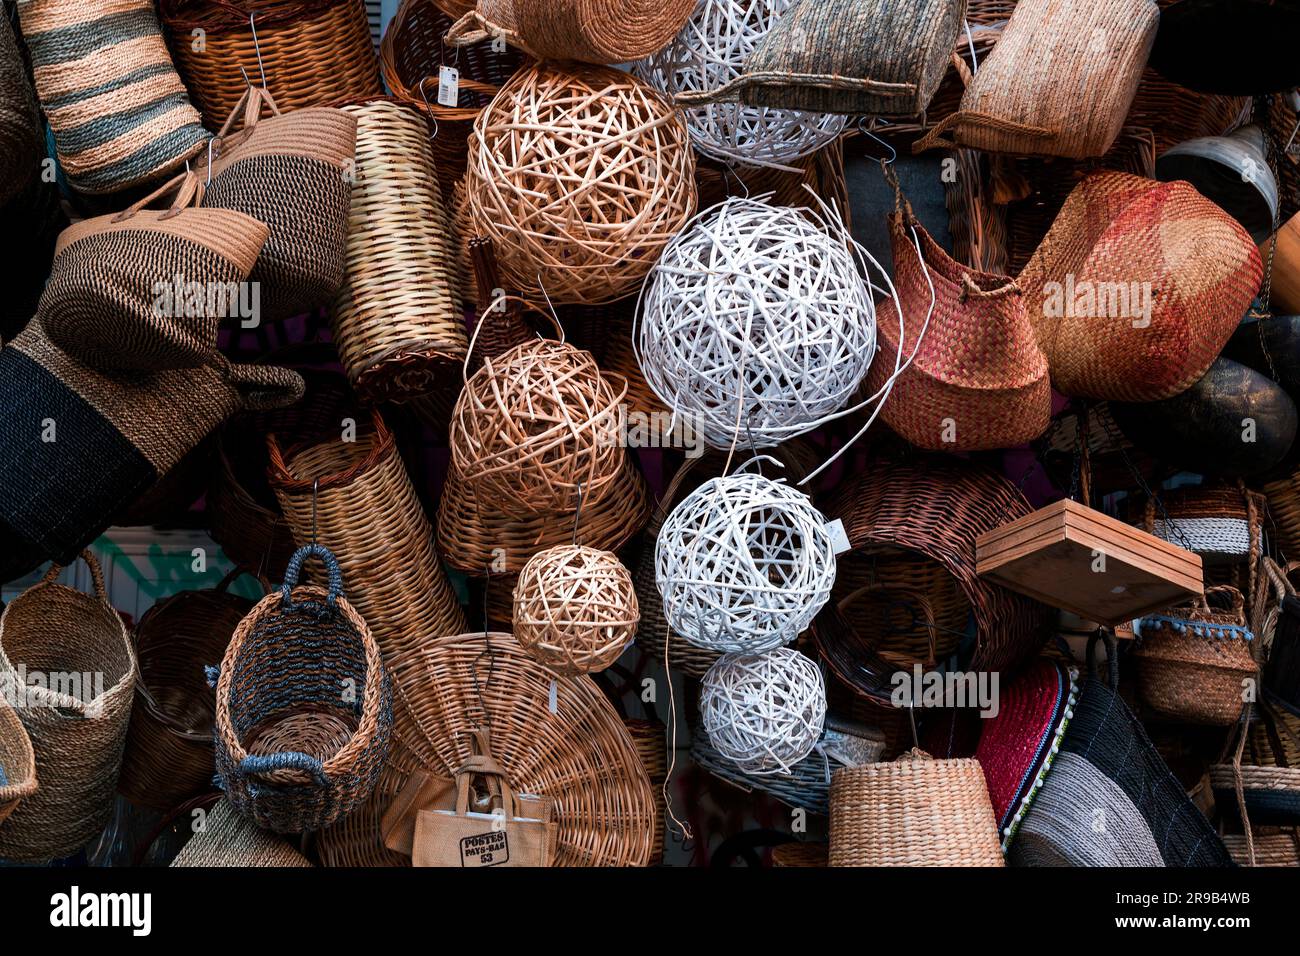 Athens, Greece - 25 Nov 2021: Traditional handmade baskets and household items sold at a basket shop in Athens, Greece. Stock Photo